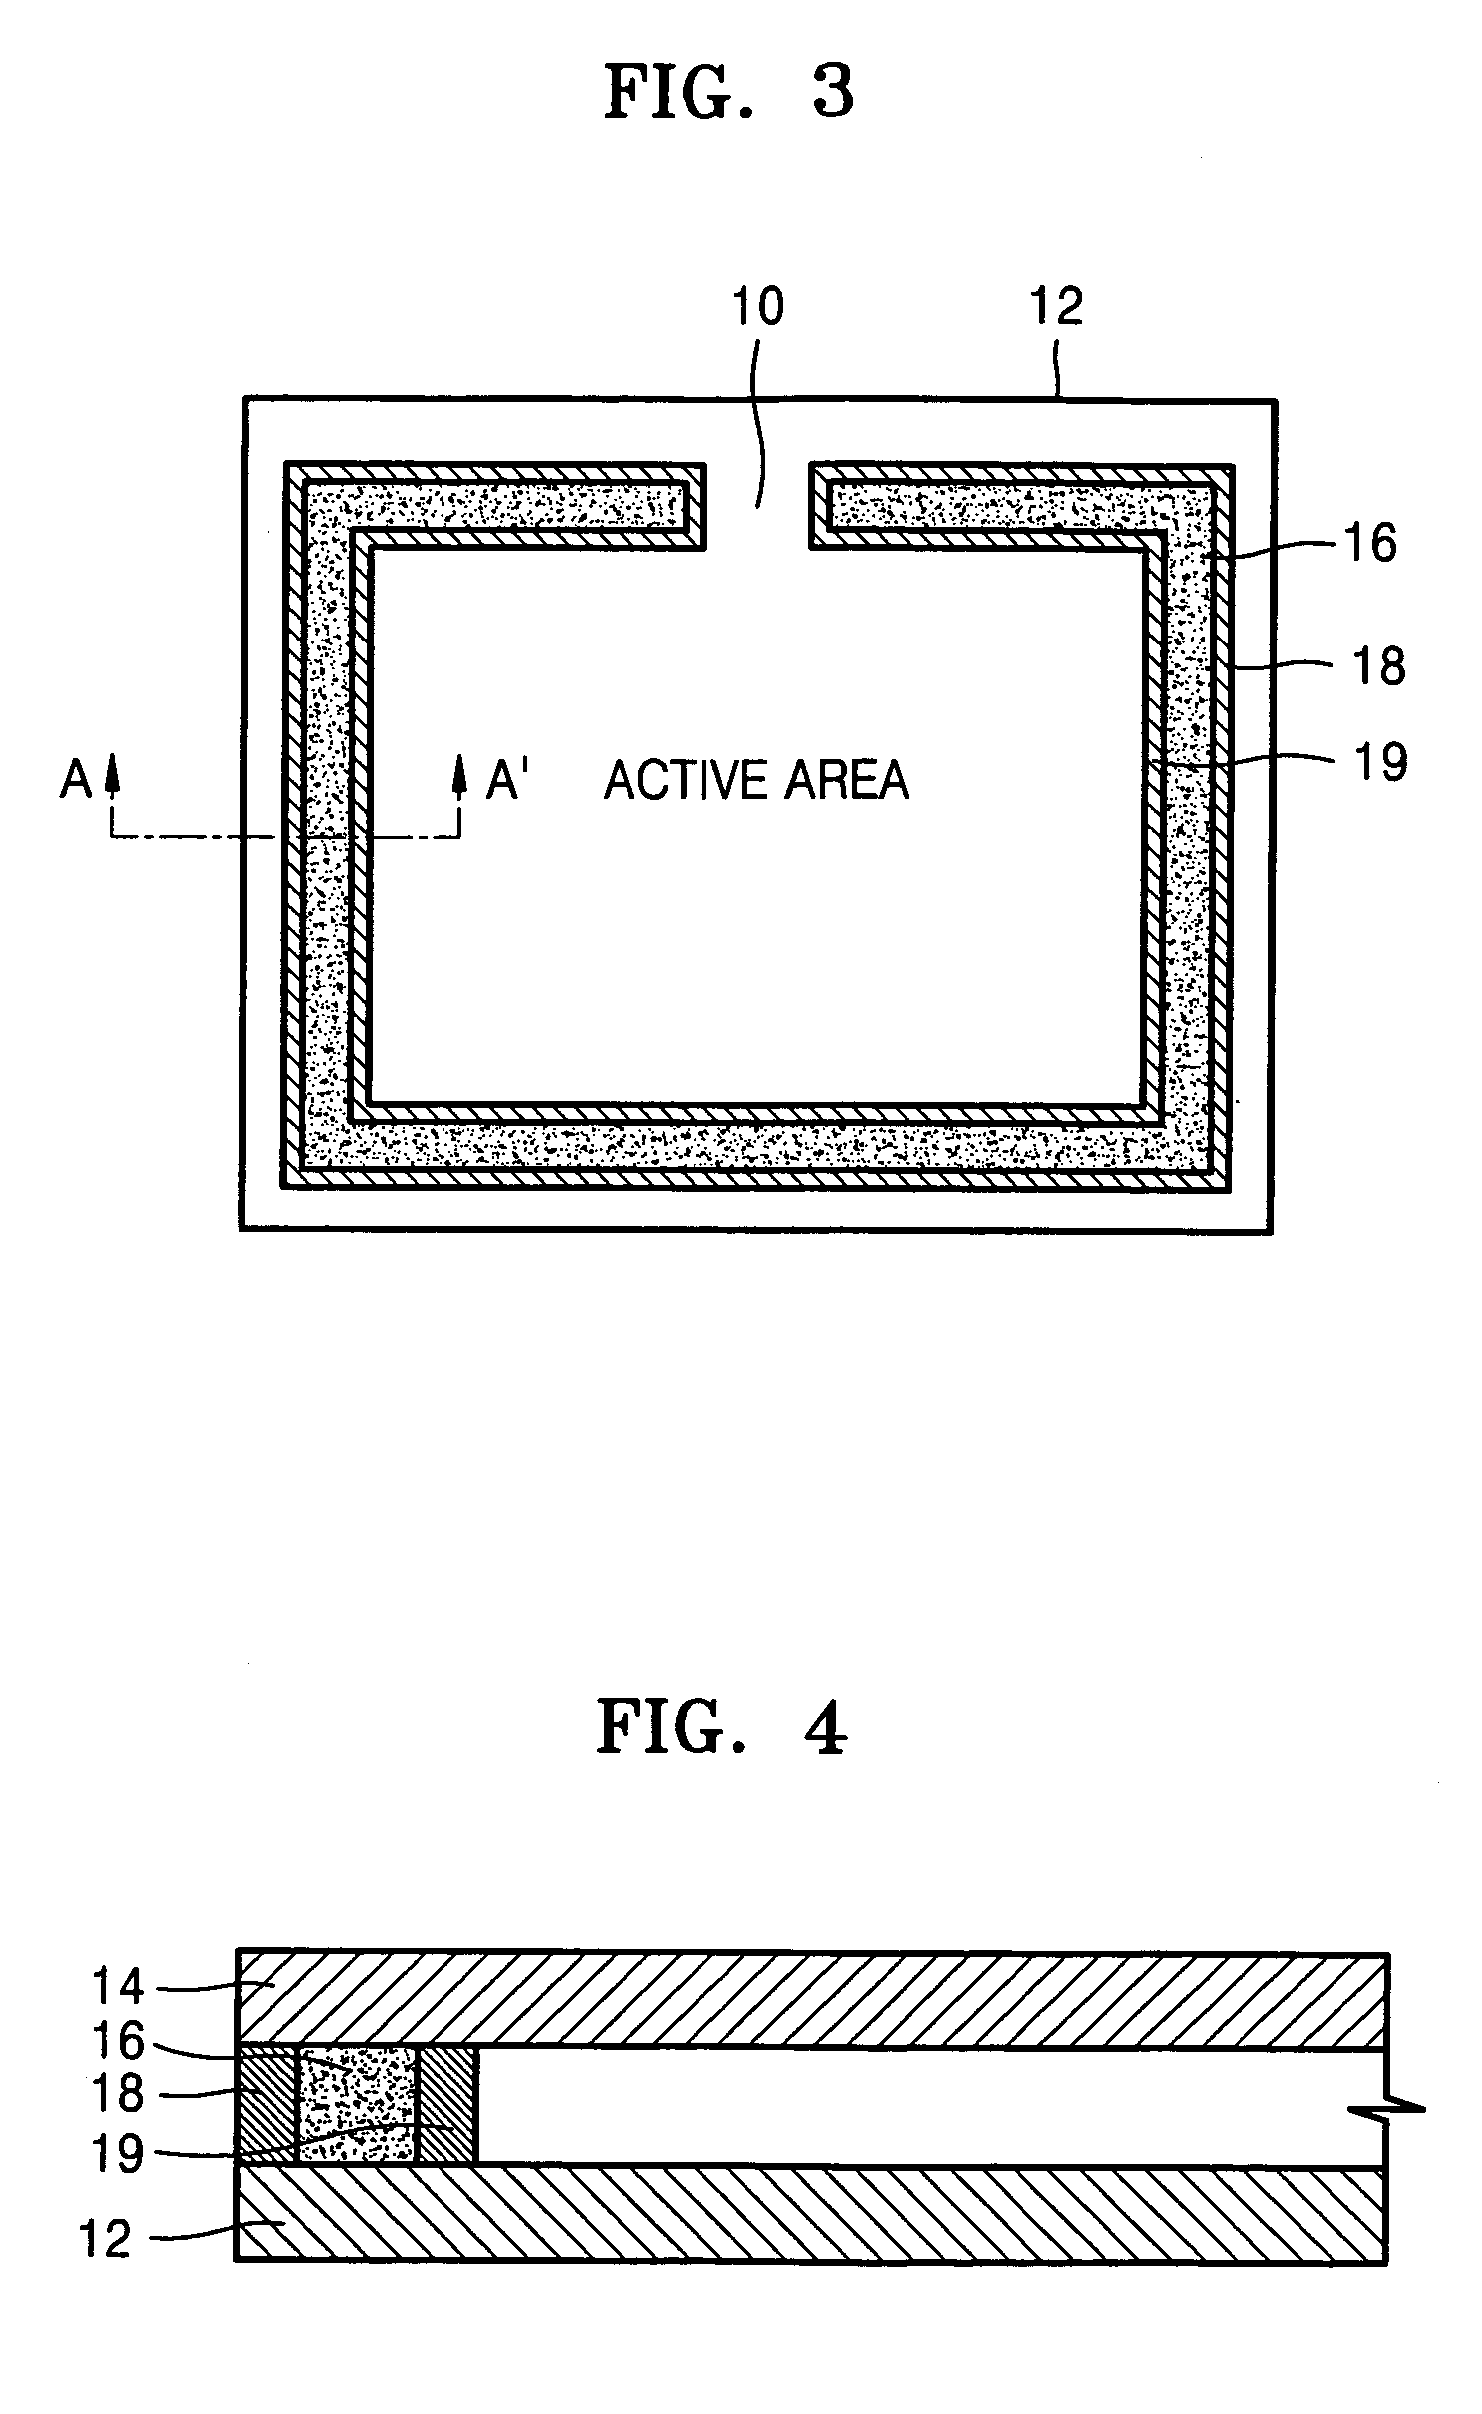 Bonding structure for flat panel display and method having outer and inner walls of a predetermined interval having sealant and bonded to upper and lower substrates for unimpeded cell gap between the substrates and the inner separation wall